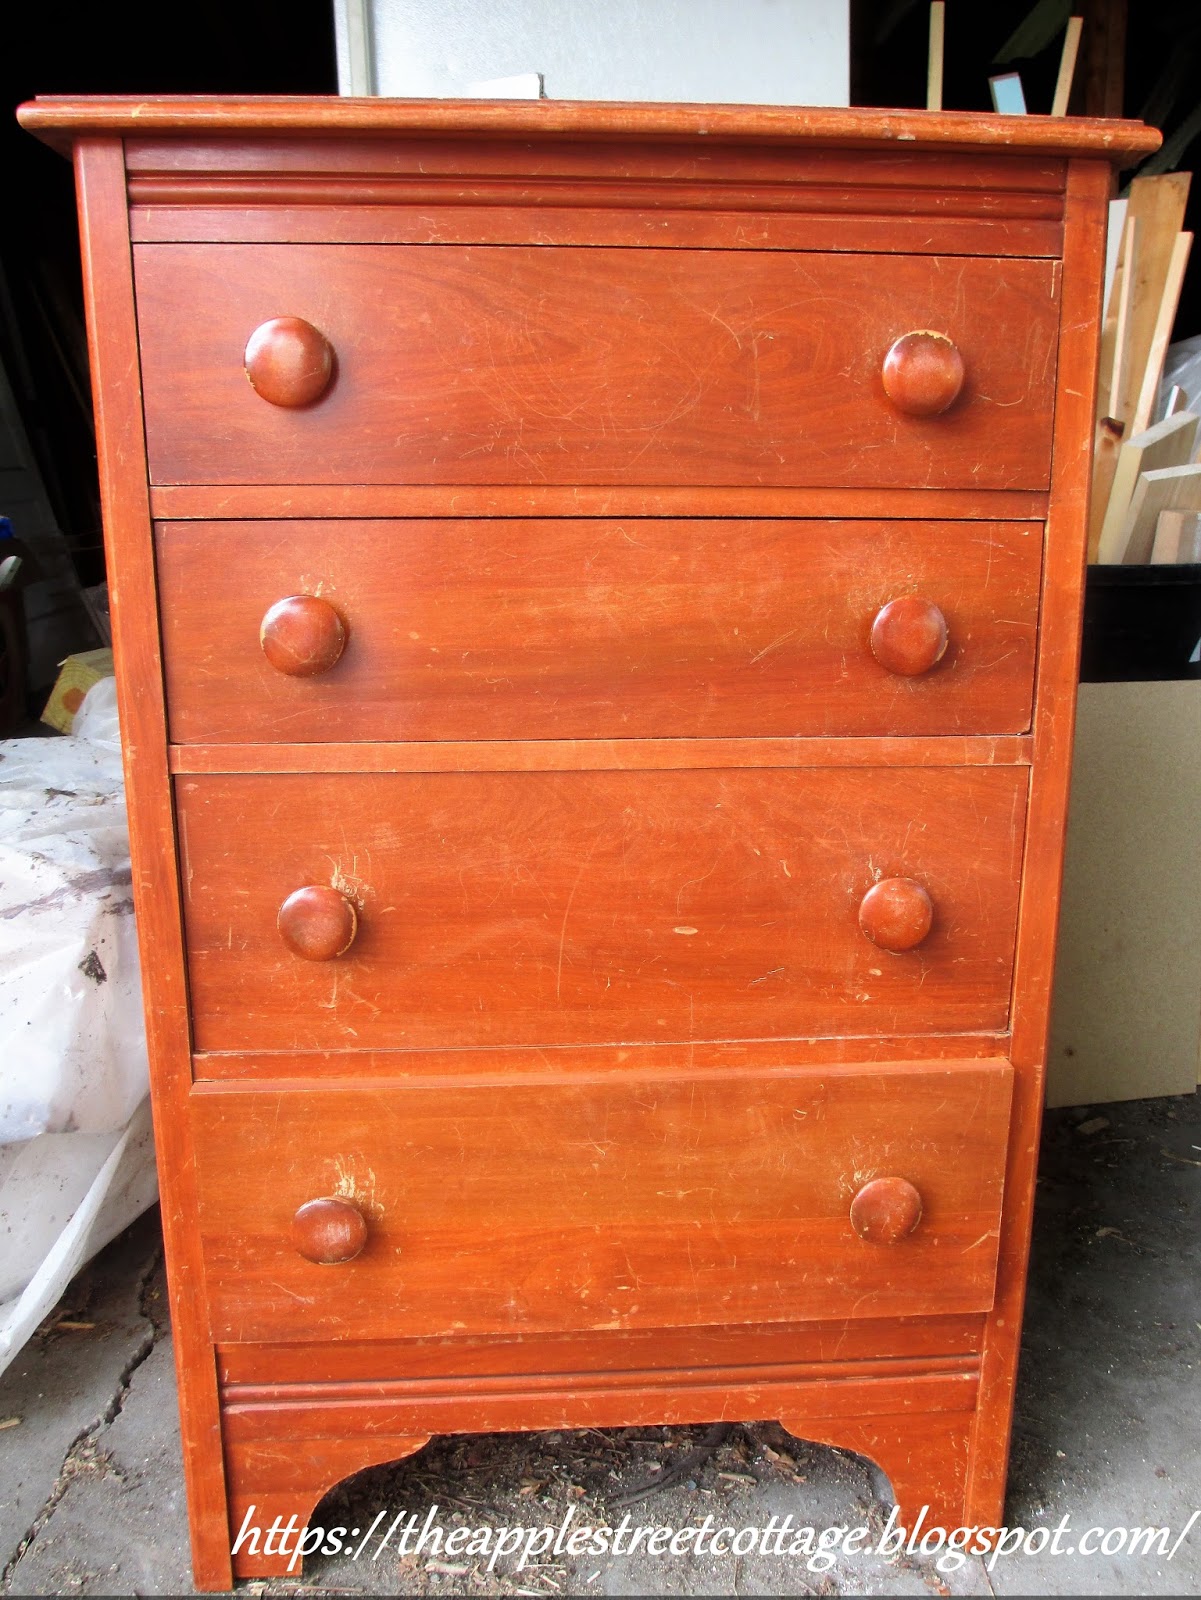 The Poplar Chest Of Drawers